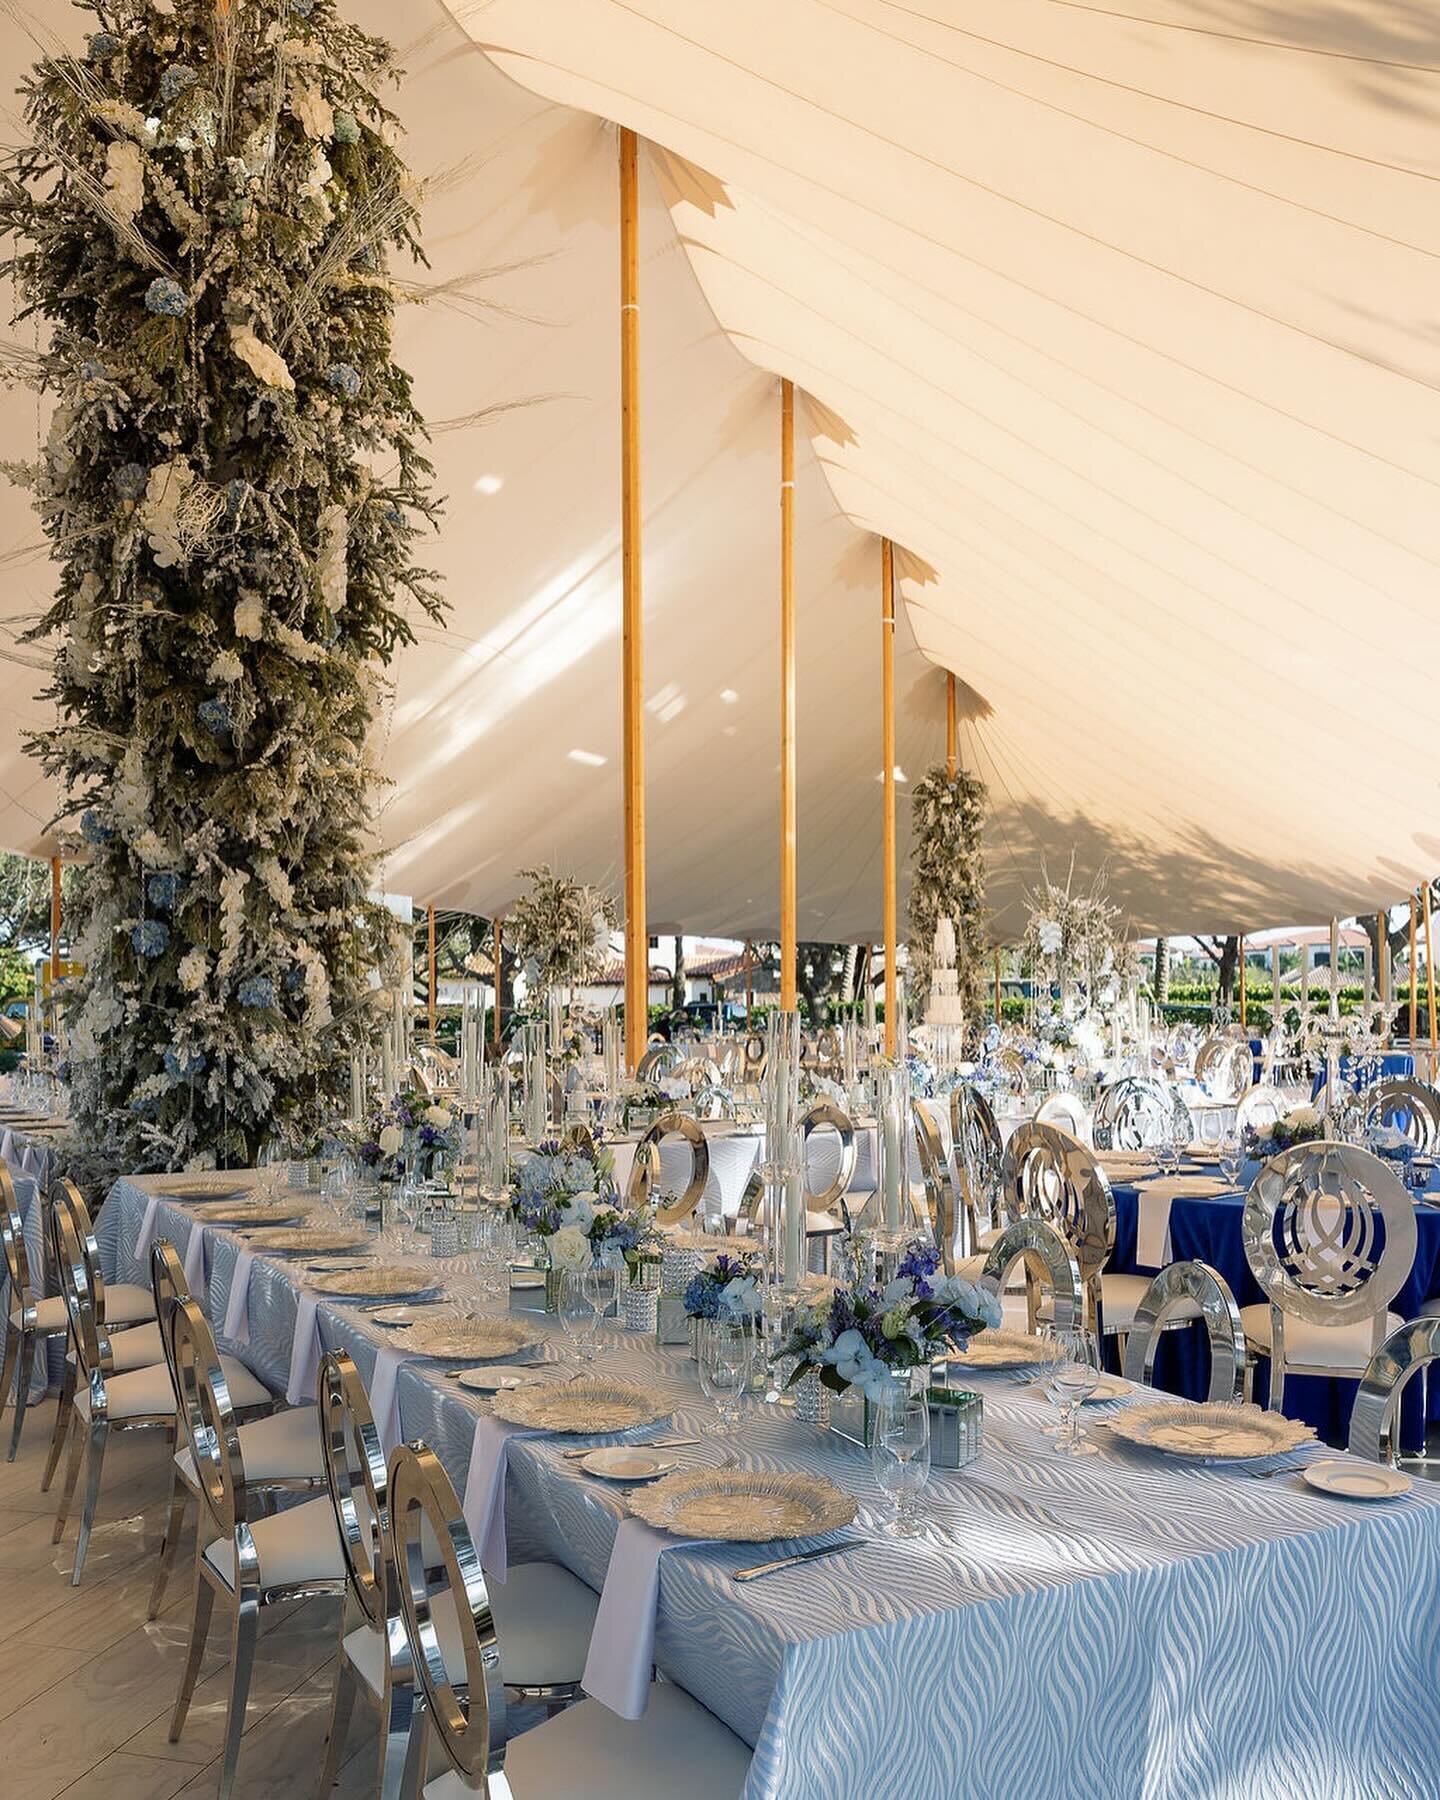 Nothing beats a Sperry Tent!

Planning &amp; Design: @lisalondonevents 
Photo: @veronicacostaweddings 
Video: @diamondpeakfilms 
Venue: @talis_parkgc 
Florals: @tomtrovatoeventfloraldesign 
Tent: @sperrytents @sperrytentsnaples 
Lighting: @hothouse_a